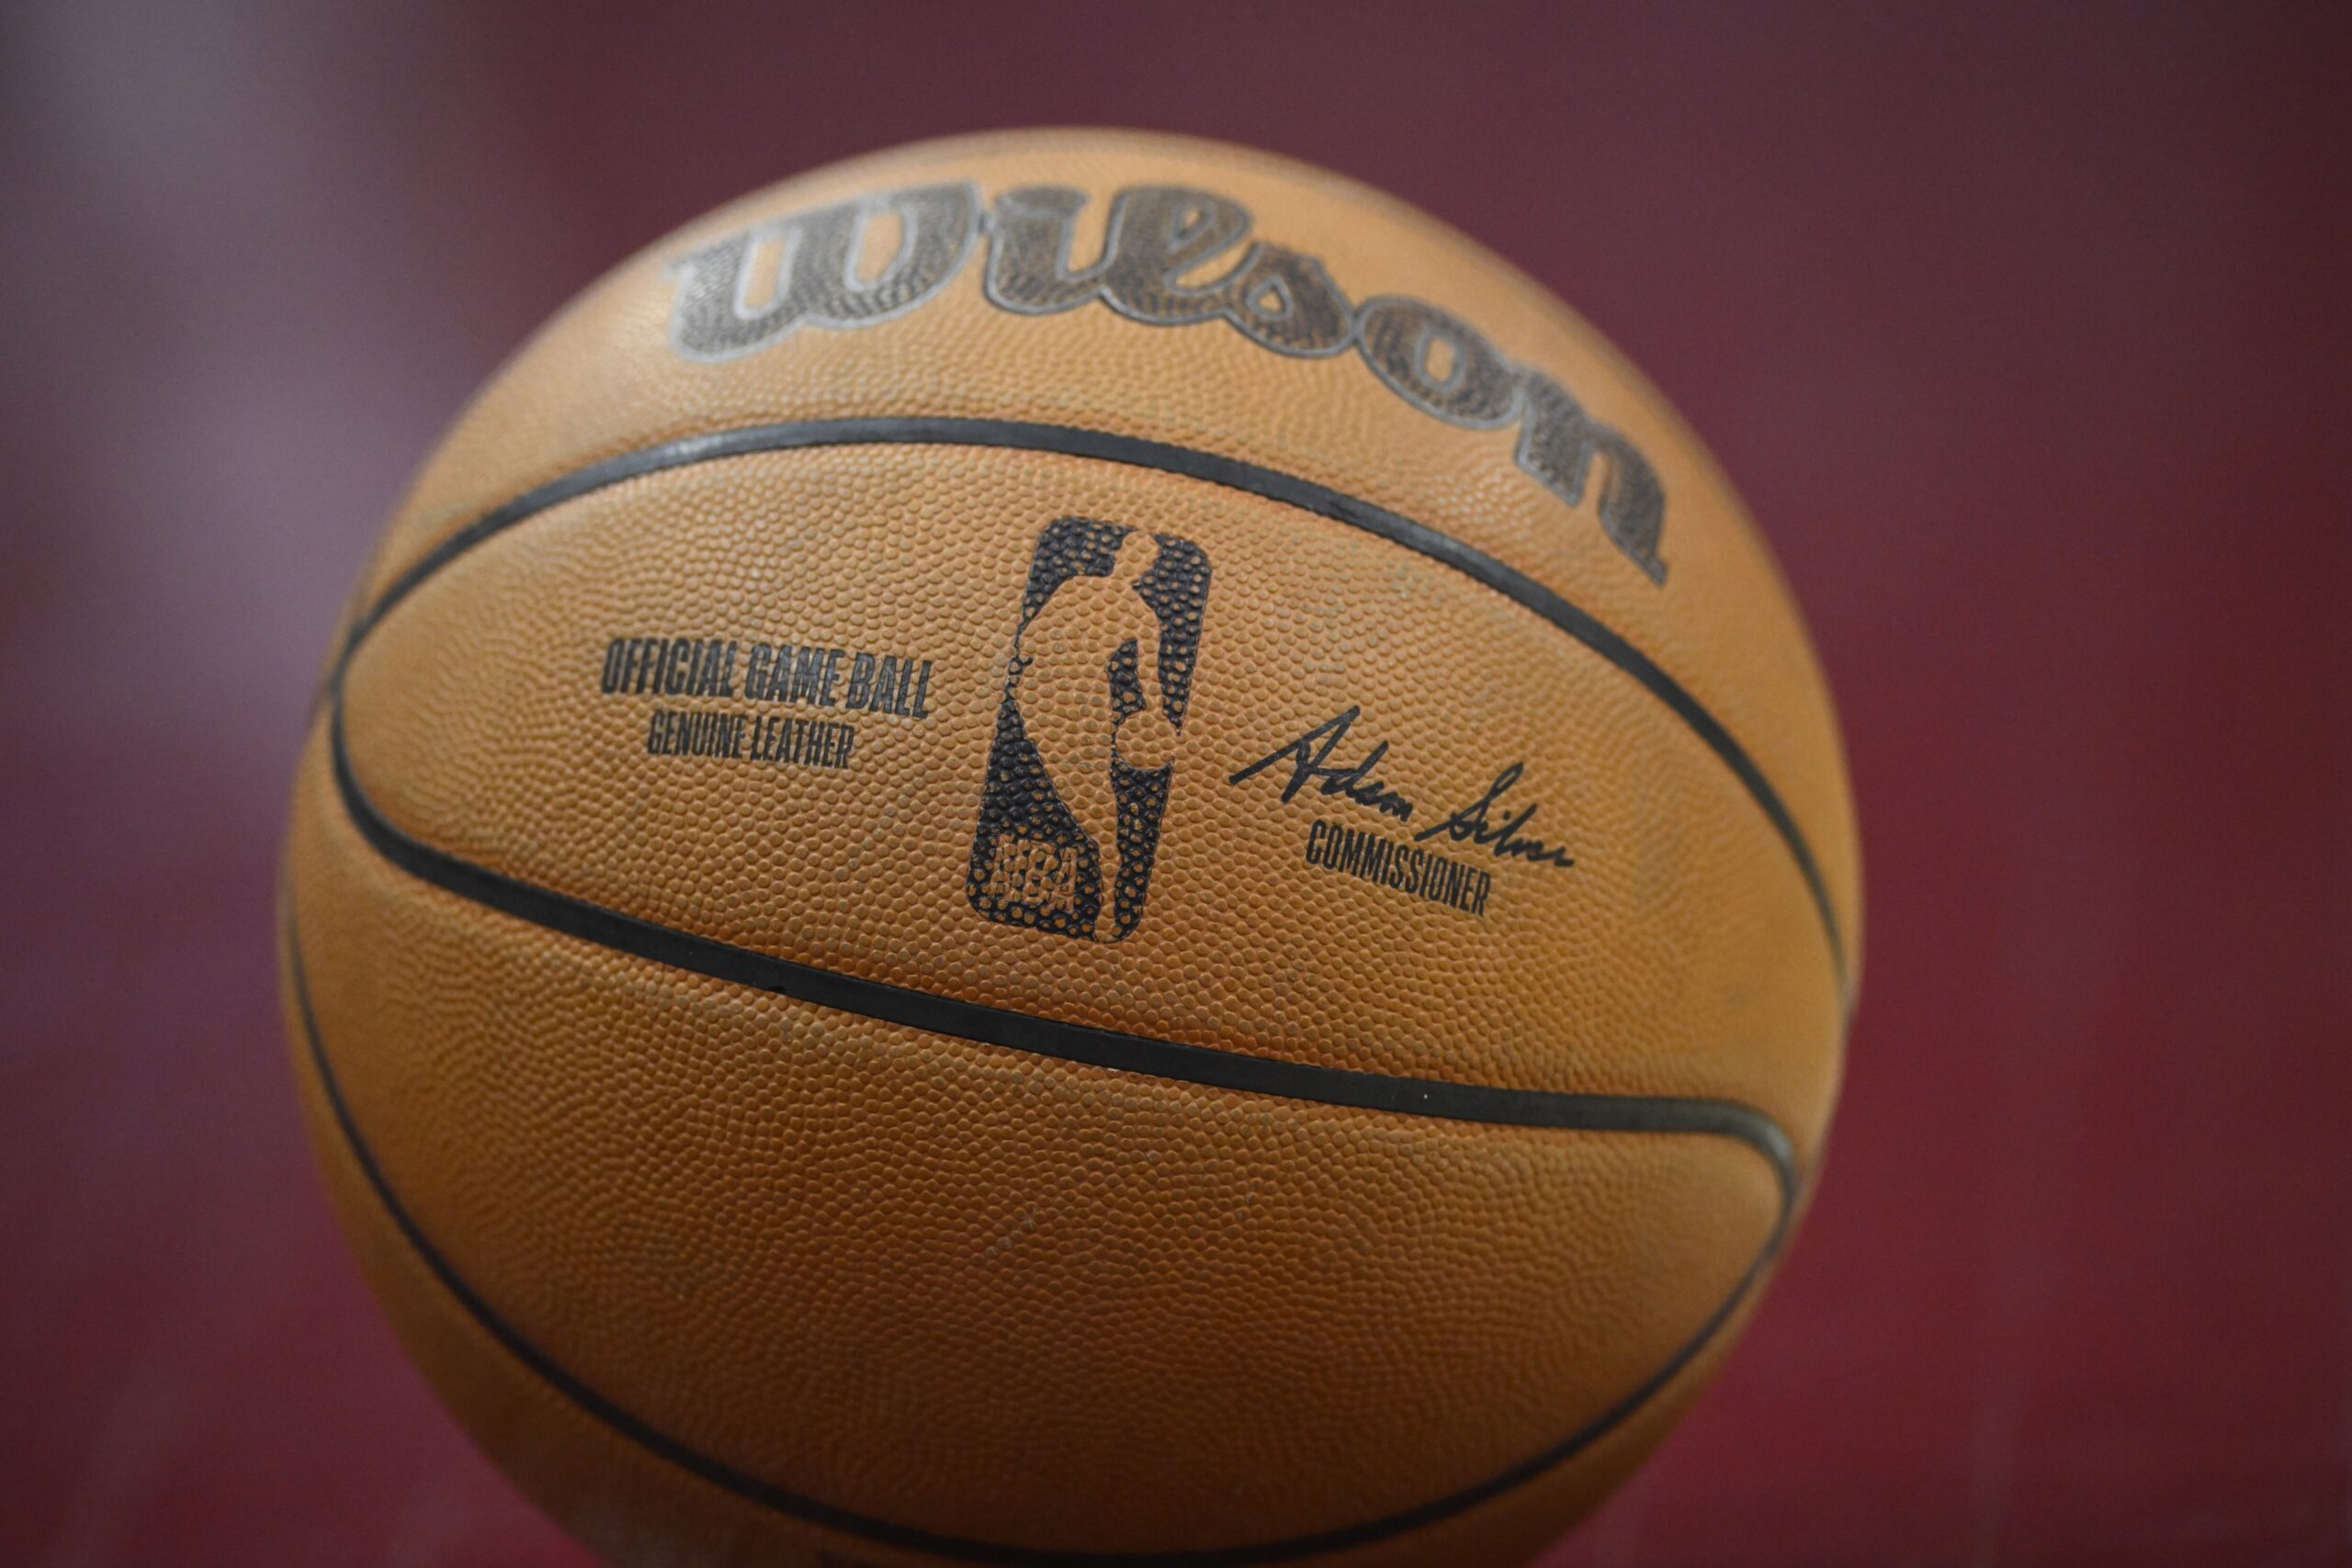 Mar 25, 2024; Cleveland, Ohio, USA; A general view of an official NBA game basketball in the second quarter of a game between the Cleveland Cavaliers and the Charlotte Hornets at Rocket Mortgage FieldHouse. Mandatory Credit: David Richard-USA TODAY Sports